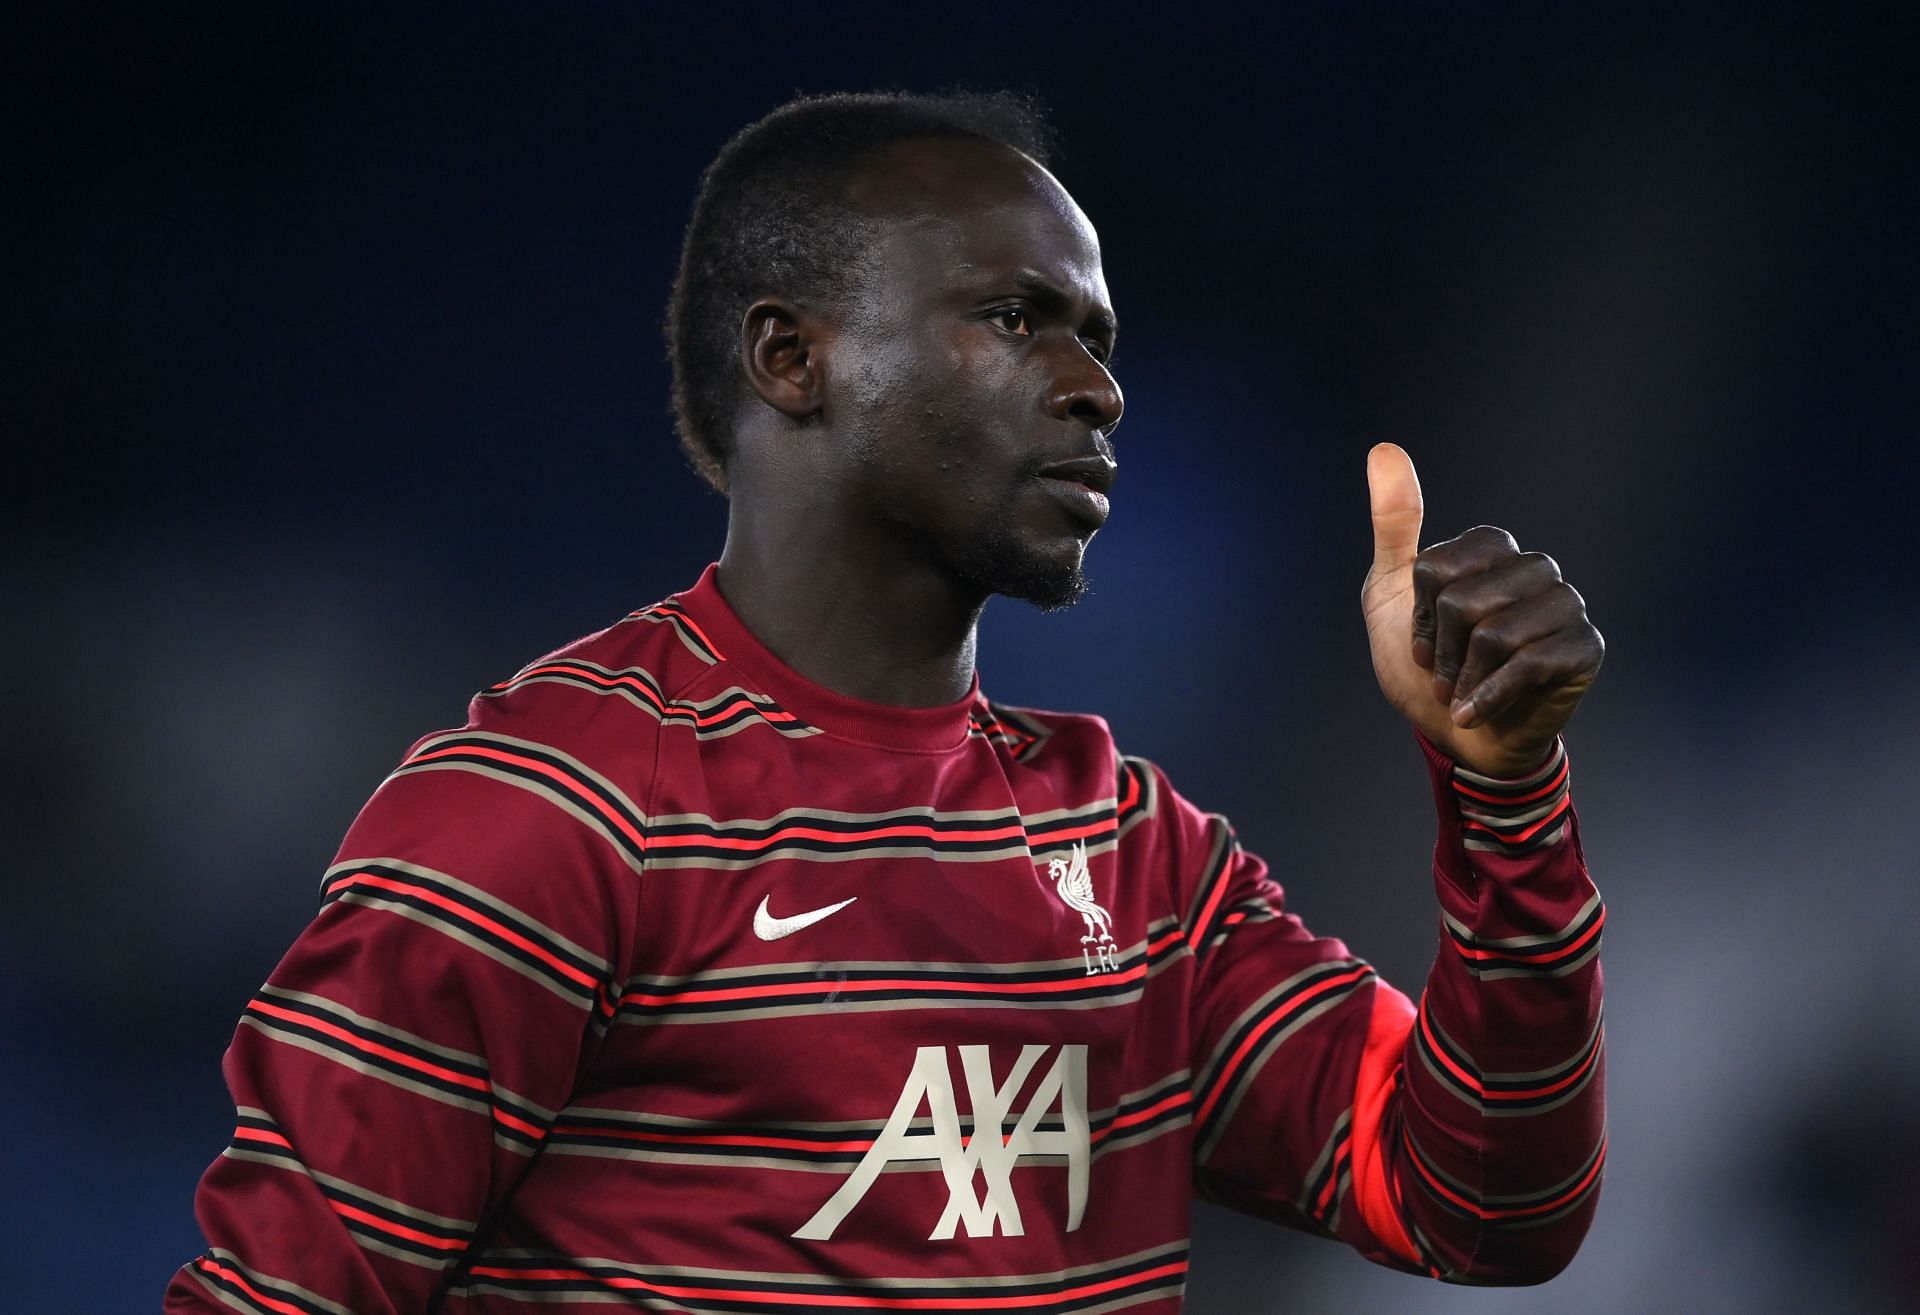 Sadio Mane may be heading for an Anfield exit